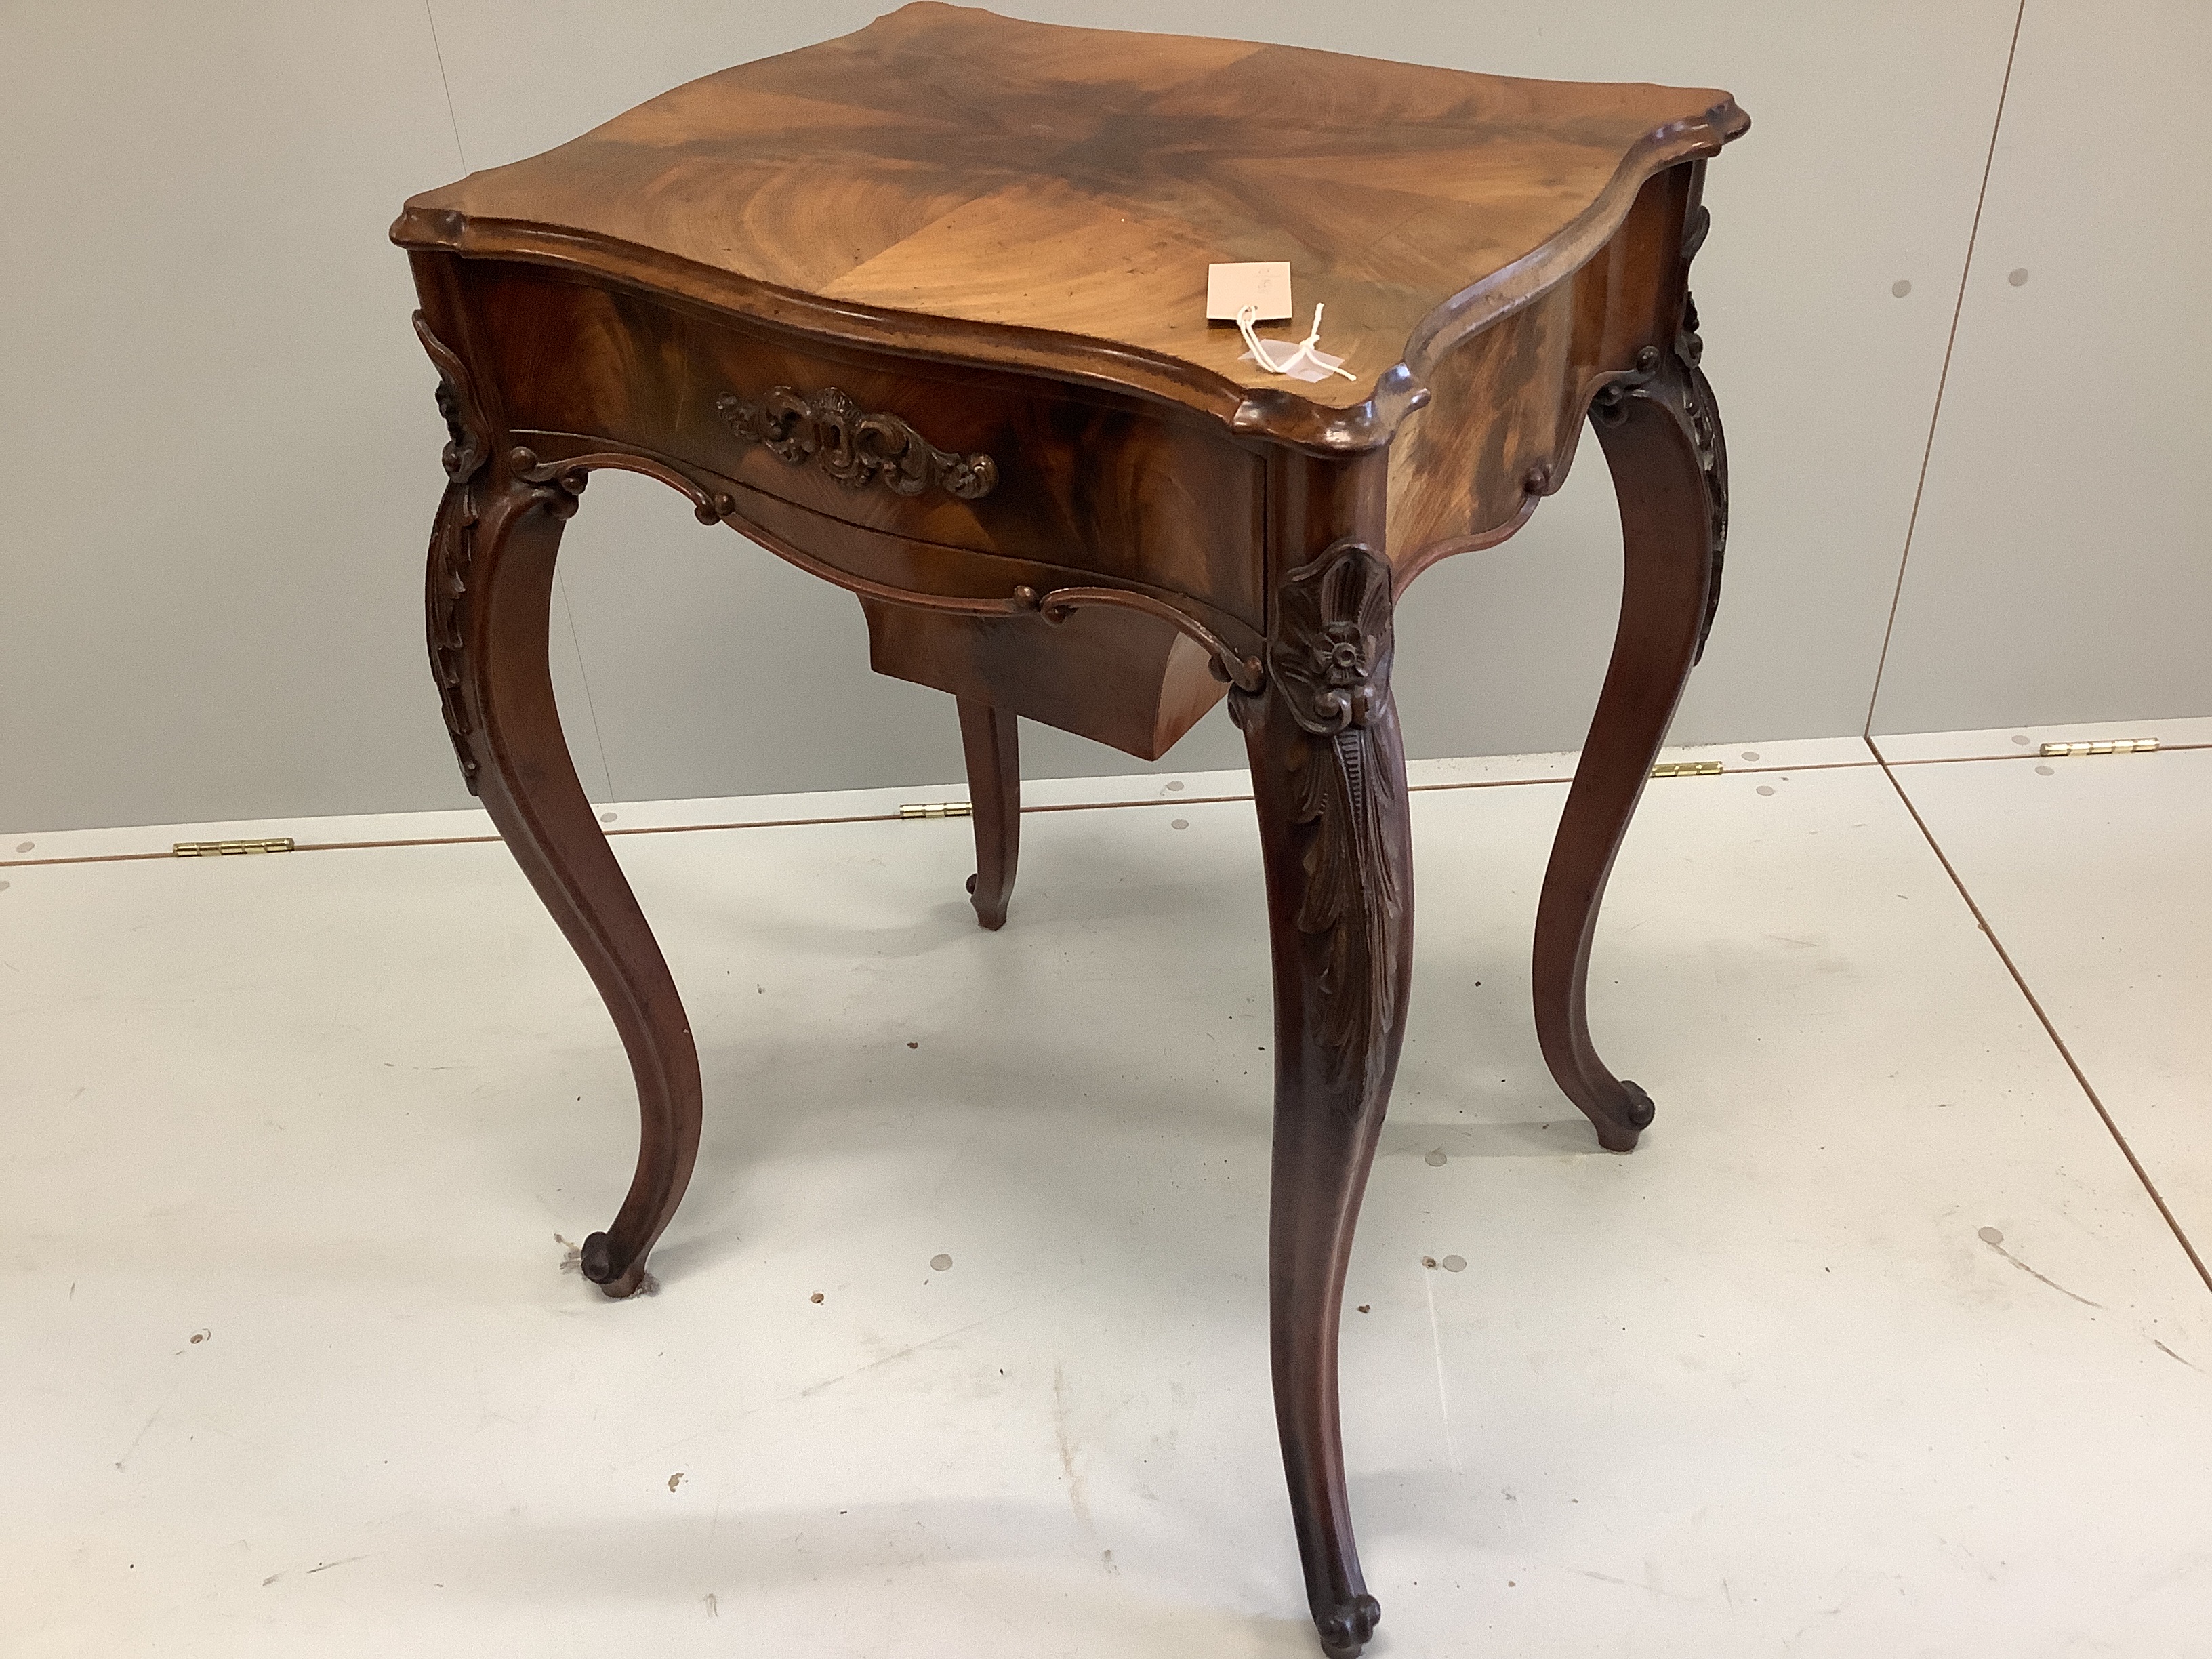 A late 19th century French mahogany work table, width 58cm, depth 48cm, height 77cm